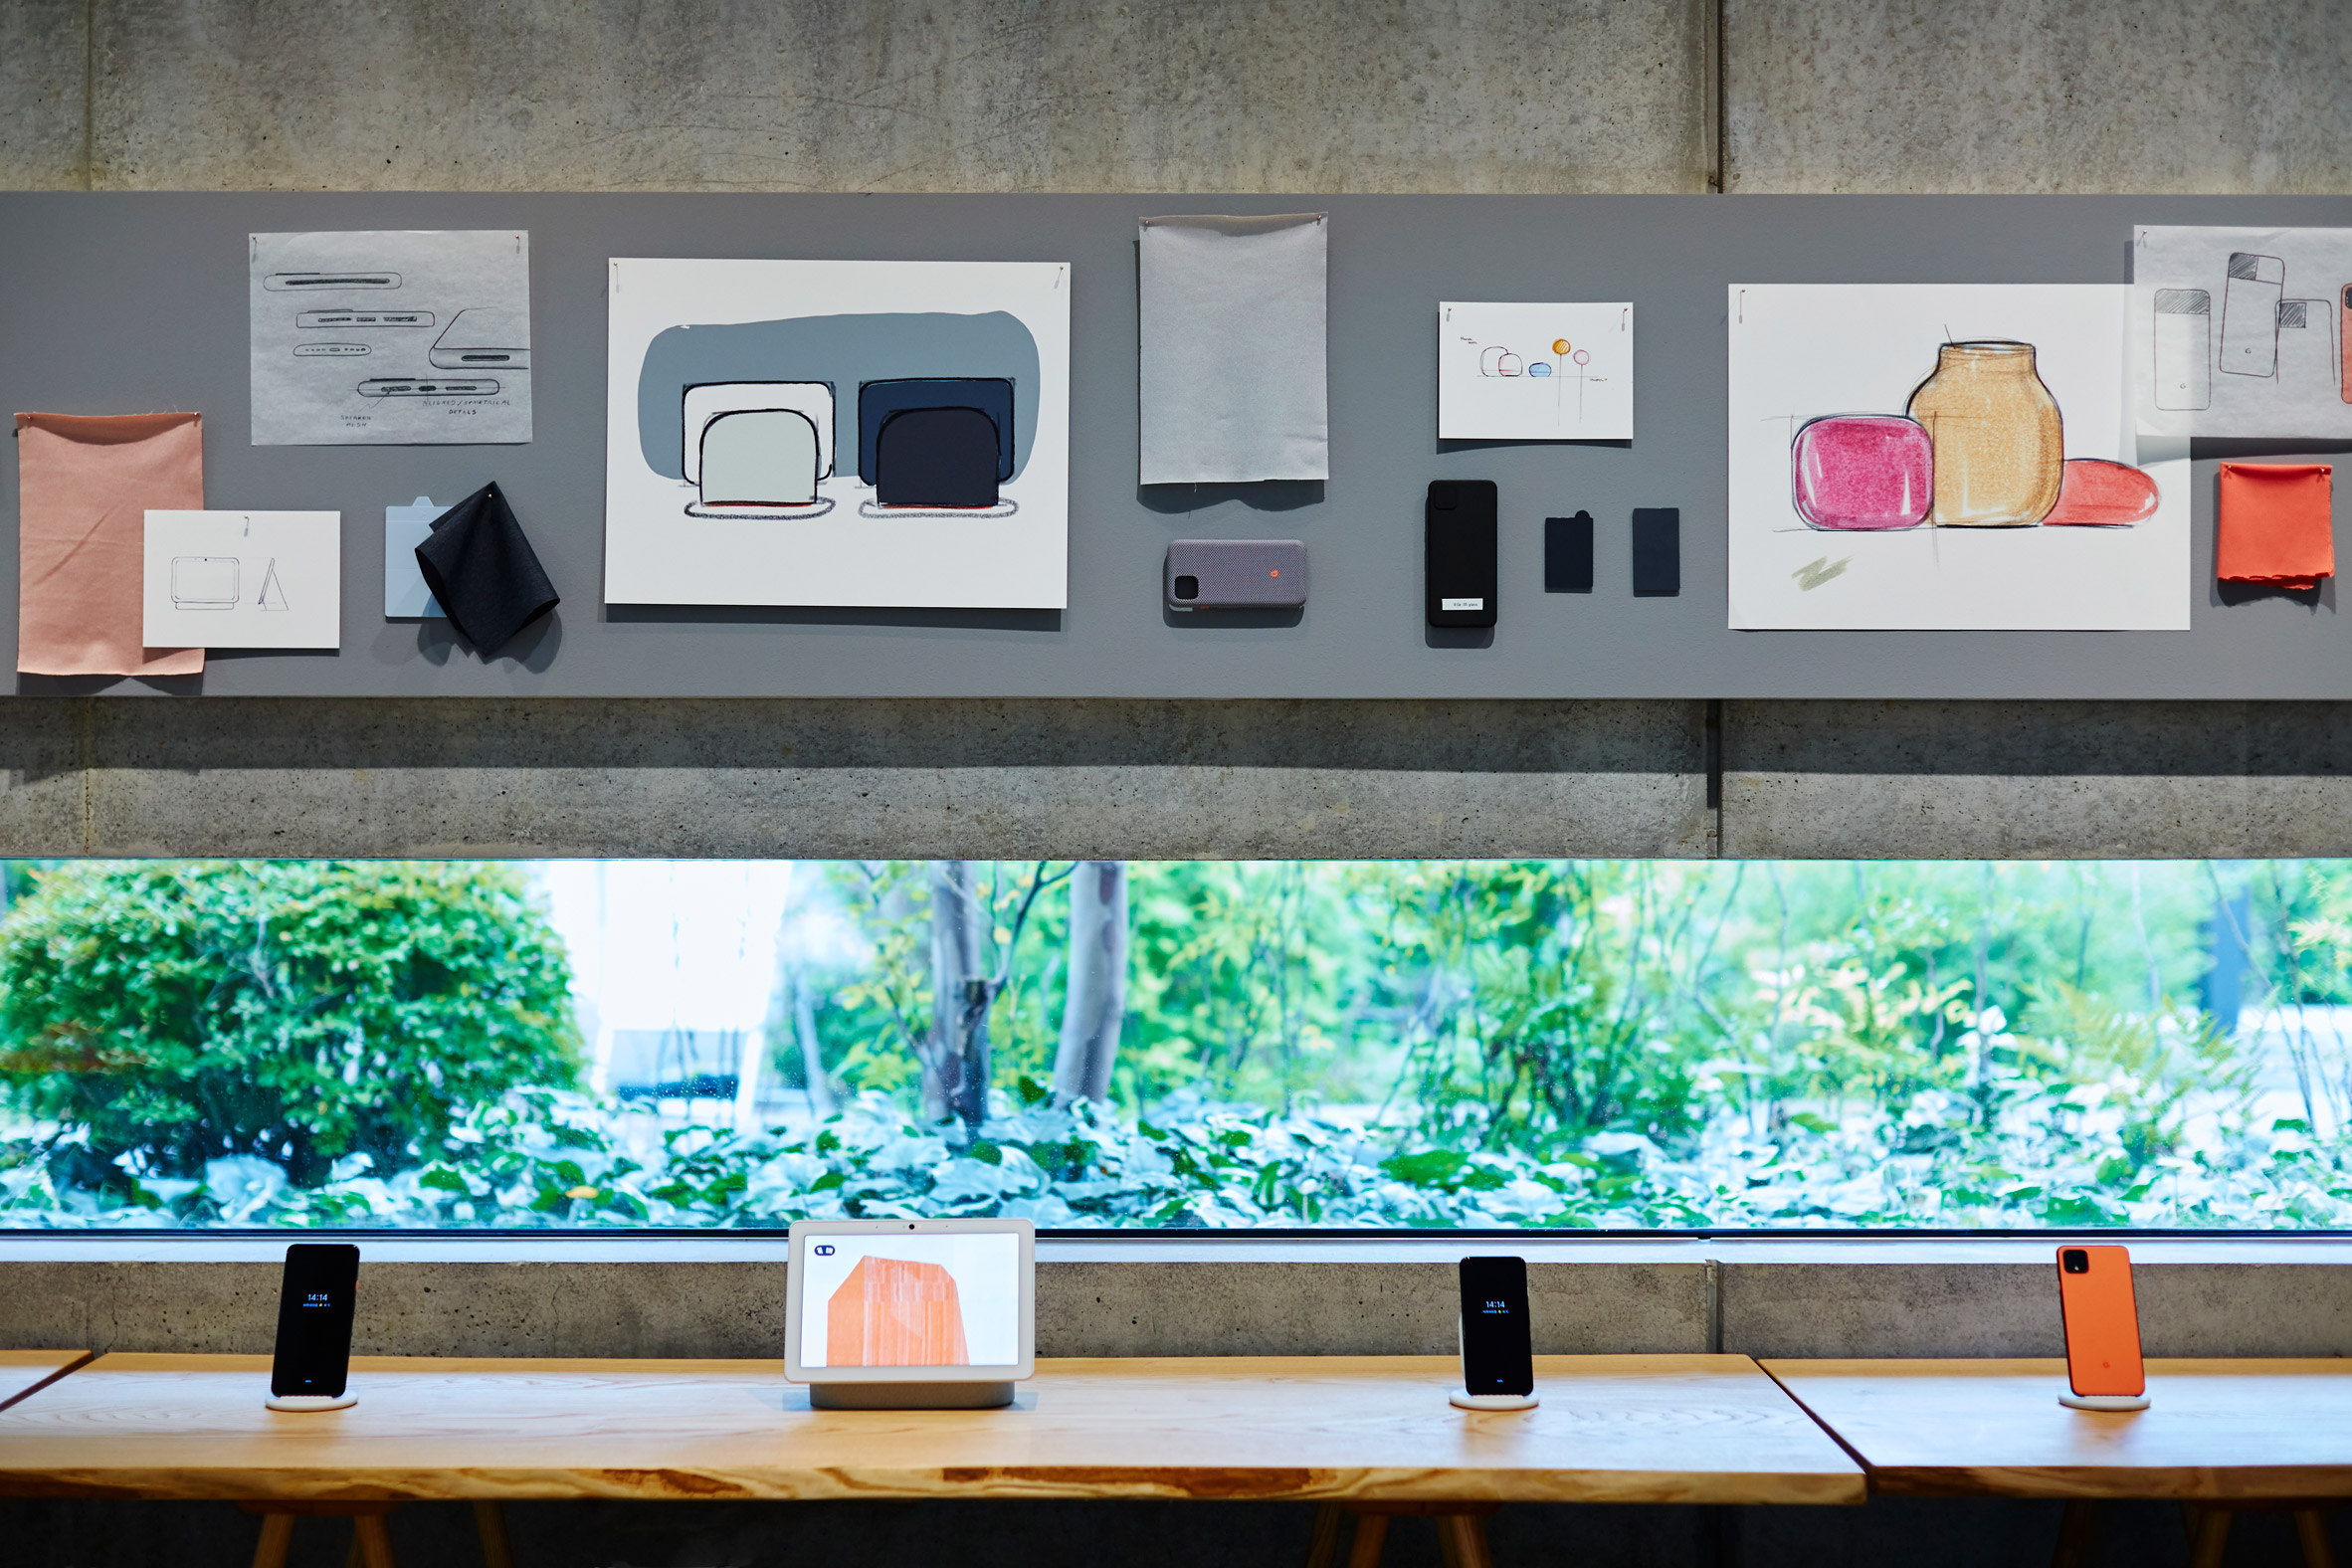 Google Hardware exhibition shows devices in everyday settings